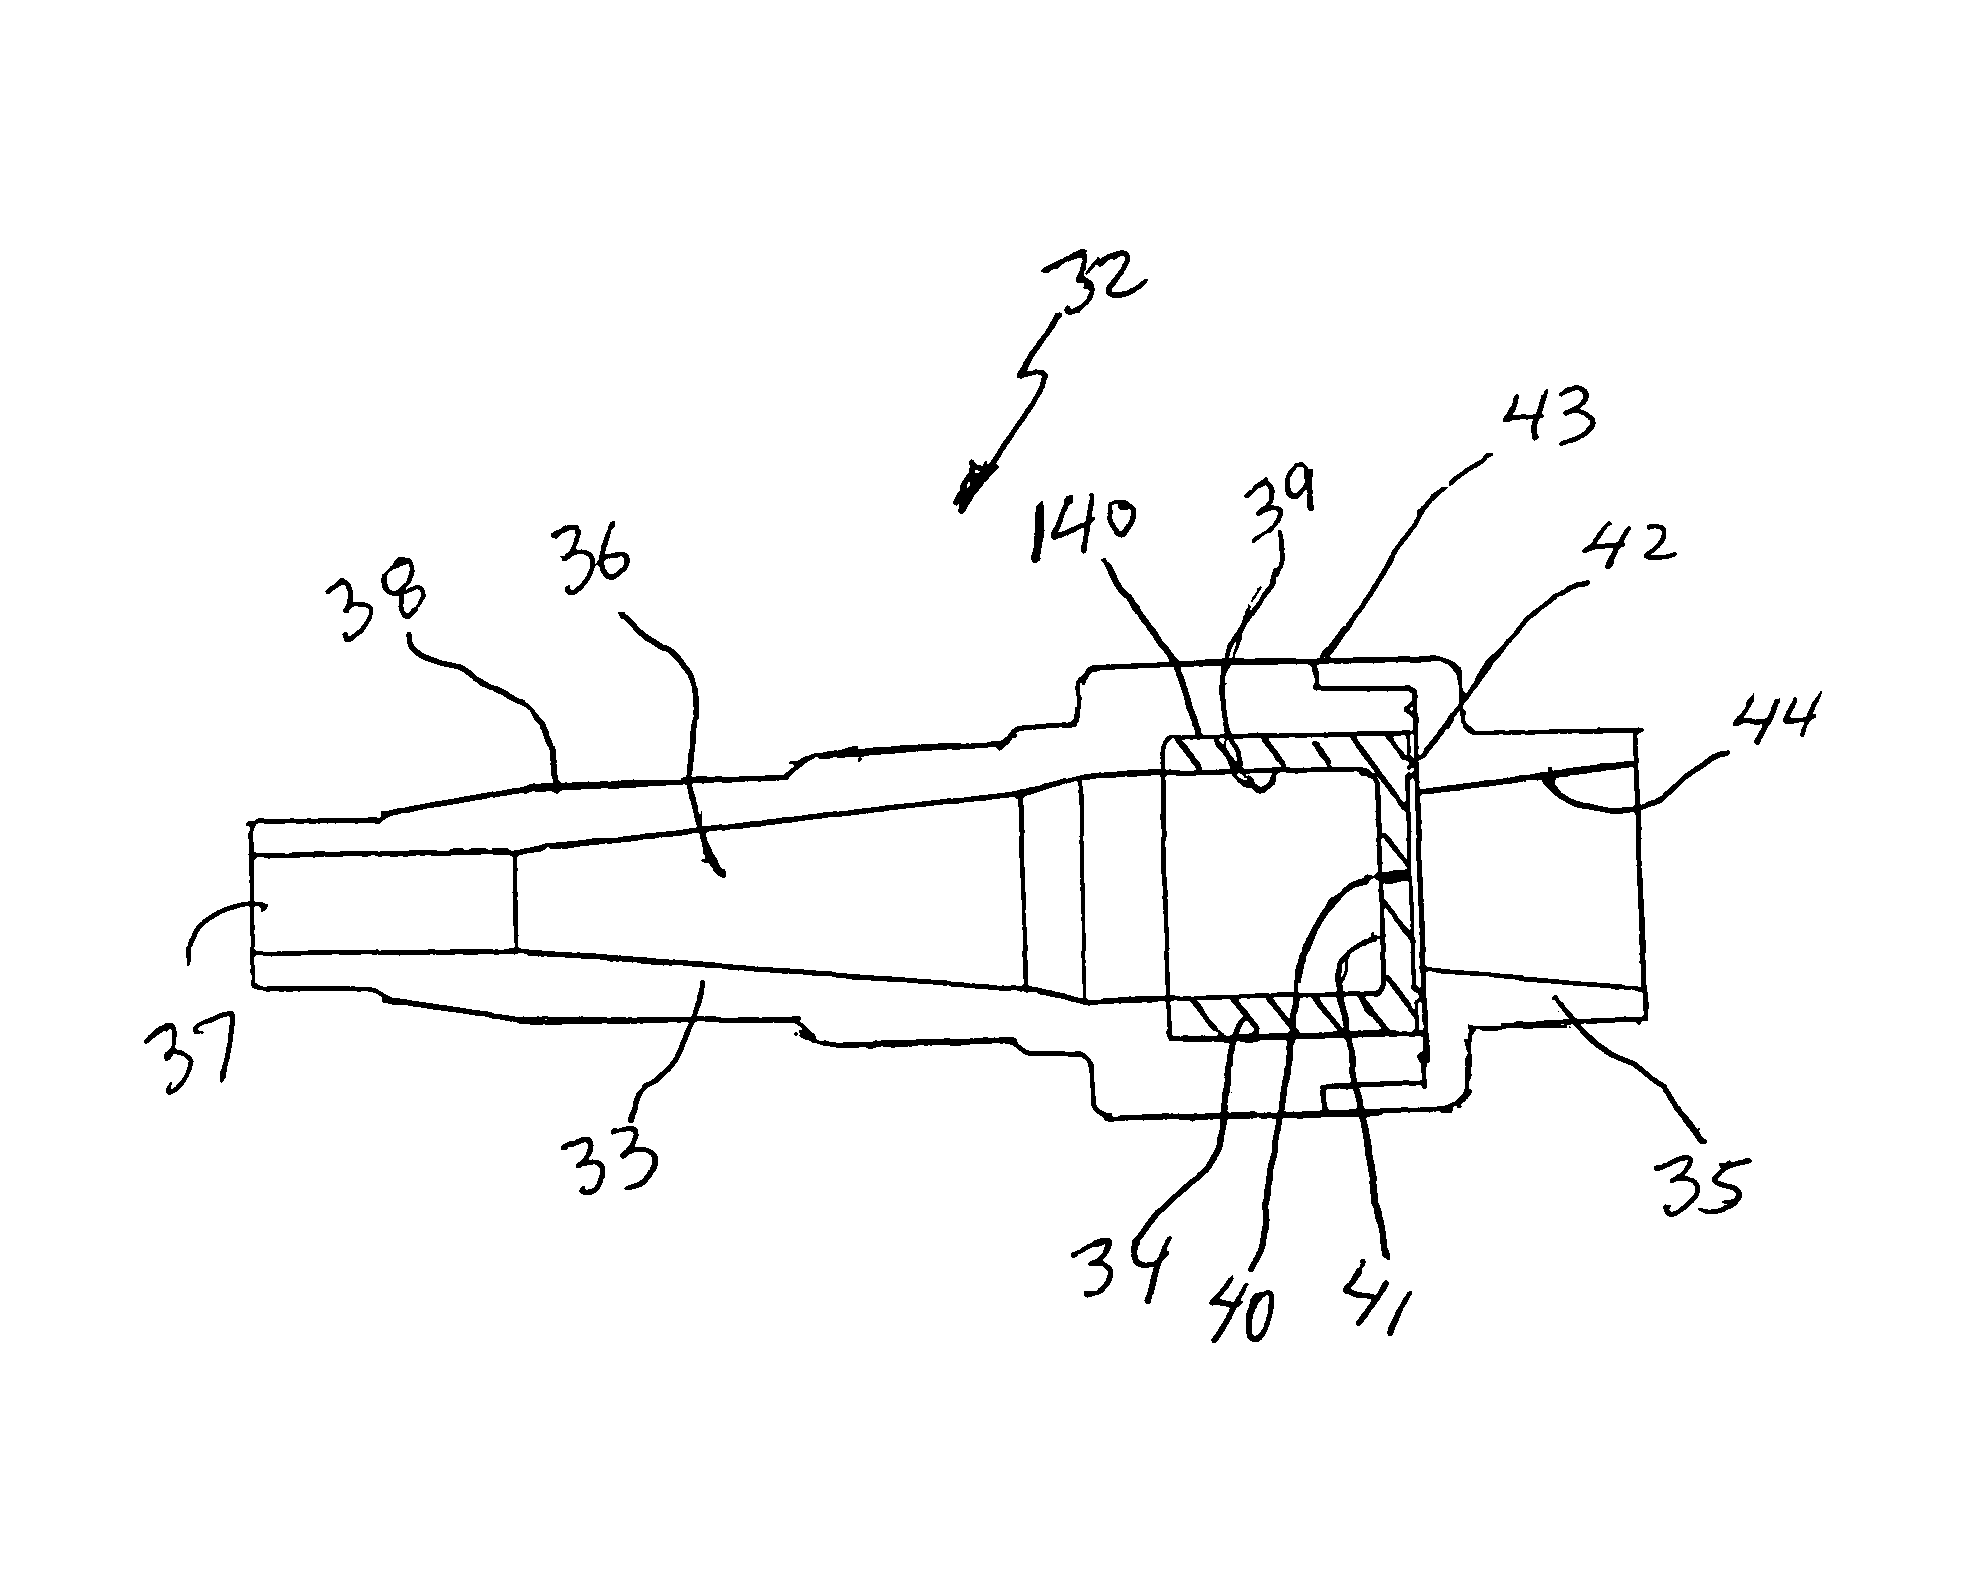 Closed system irrigation connector for urinary catheters